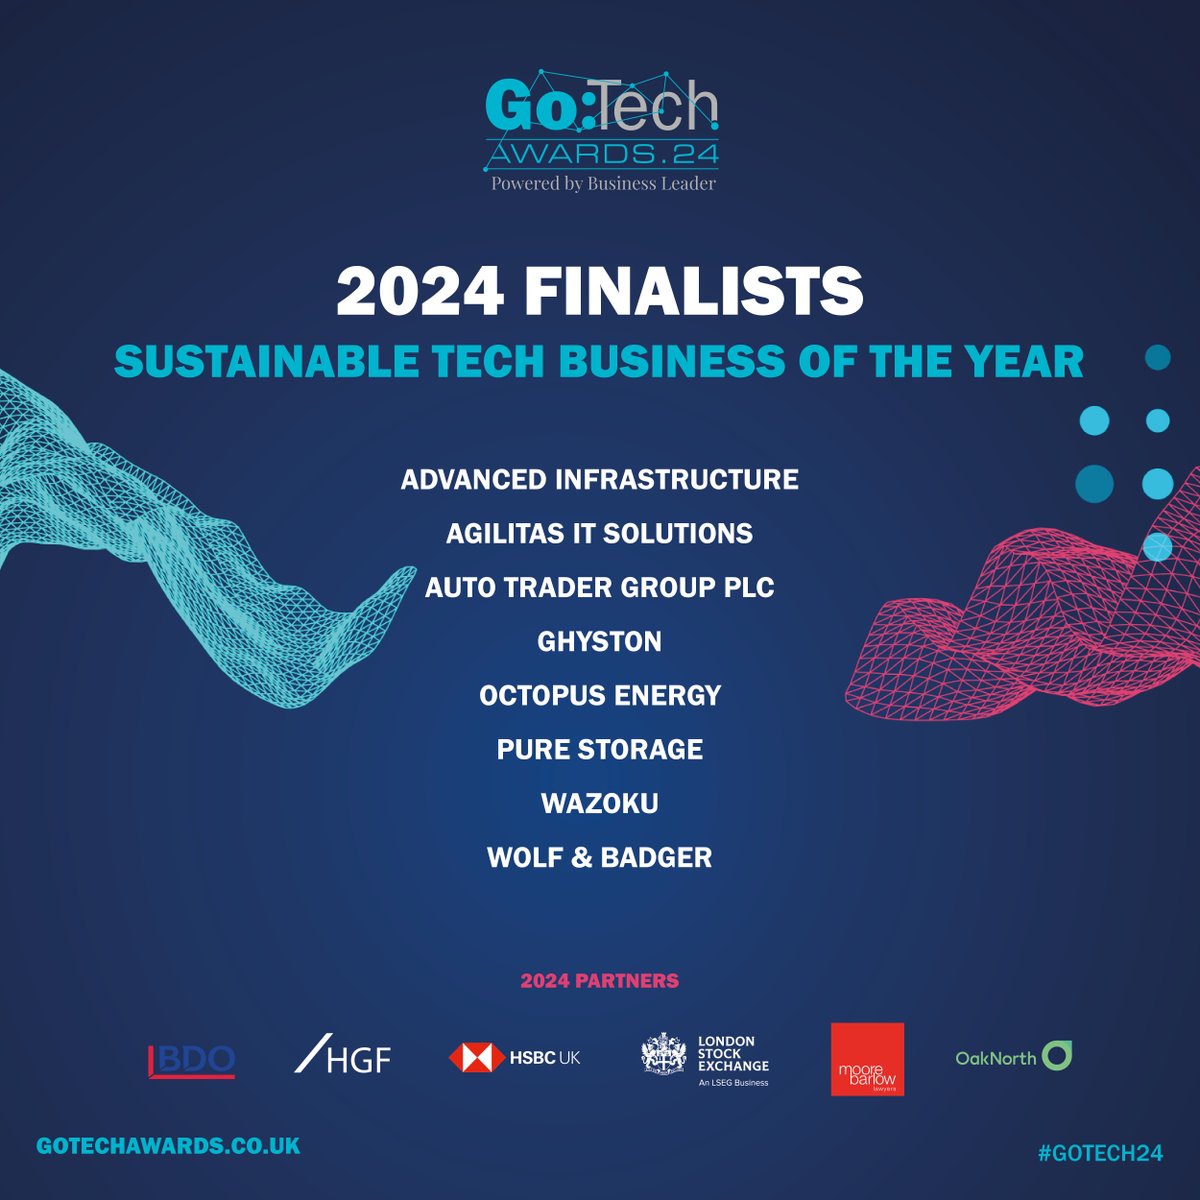 Congratulations to the finalists for the Sustainable Tech Business of the Year Award! 👏 @AdvancedInfras2 @AgilitasIT @ATInsight @GhystonSoftware @OctopusEnergy @PureStorageUK @WazokuHQ @wolfandbadger #GoTech24 powered by @businessleader